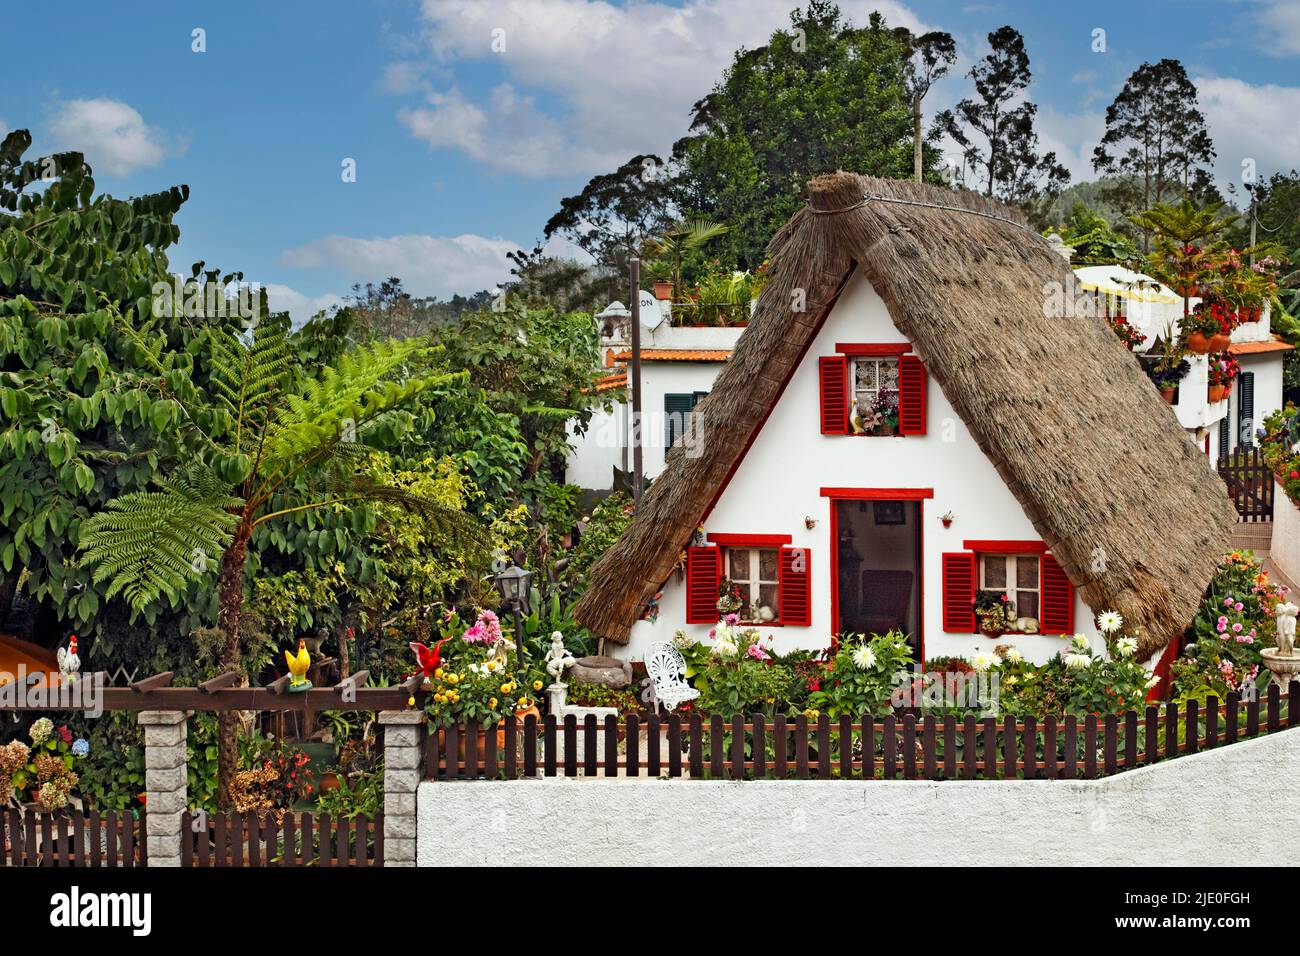 Casa de Como, thatched house, stone house, gable roof, steep, reaching to the ground, house with thatched roof, thatched roof, small, colourful Stock Photo